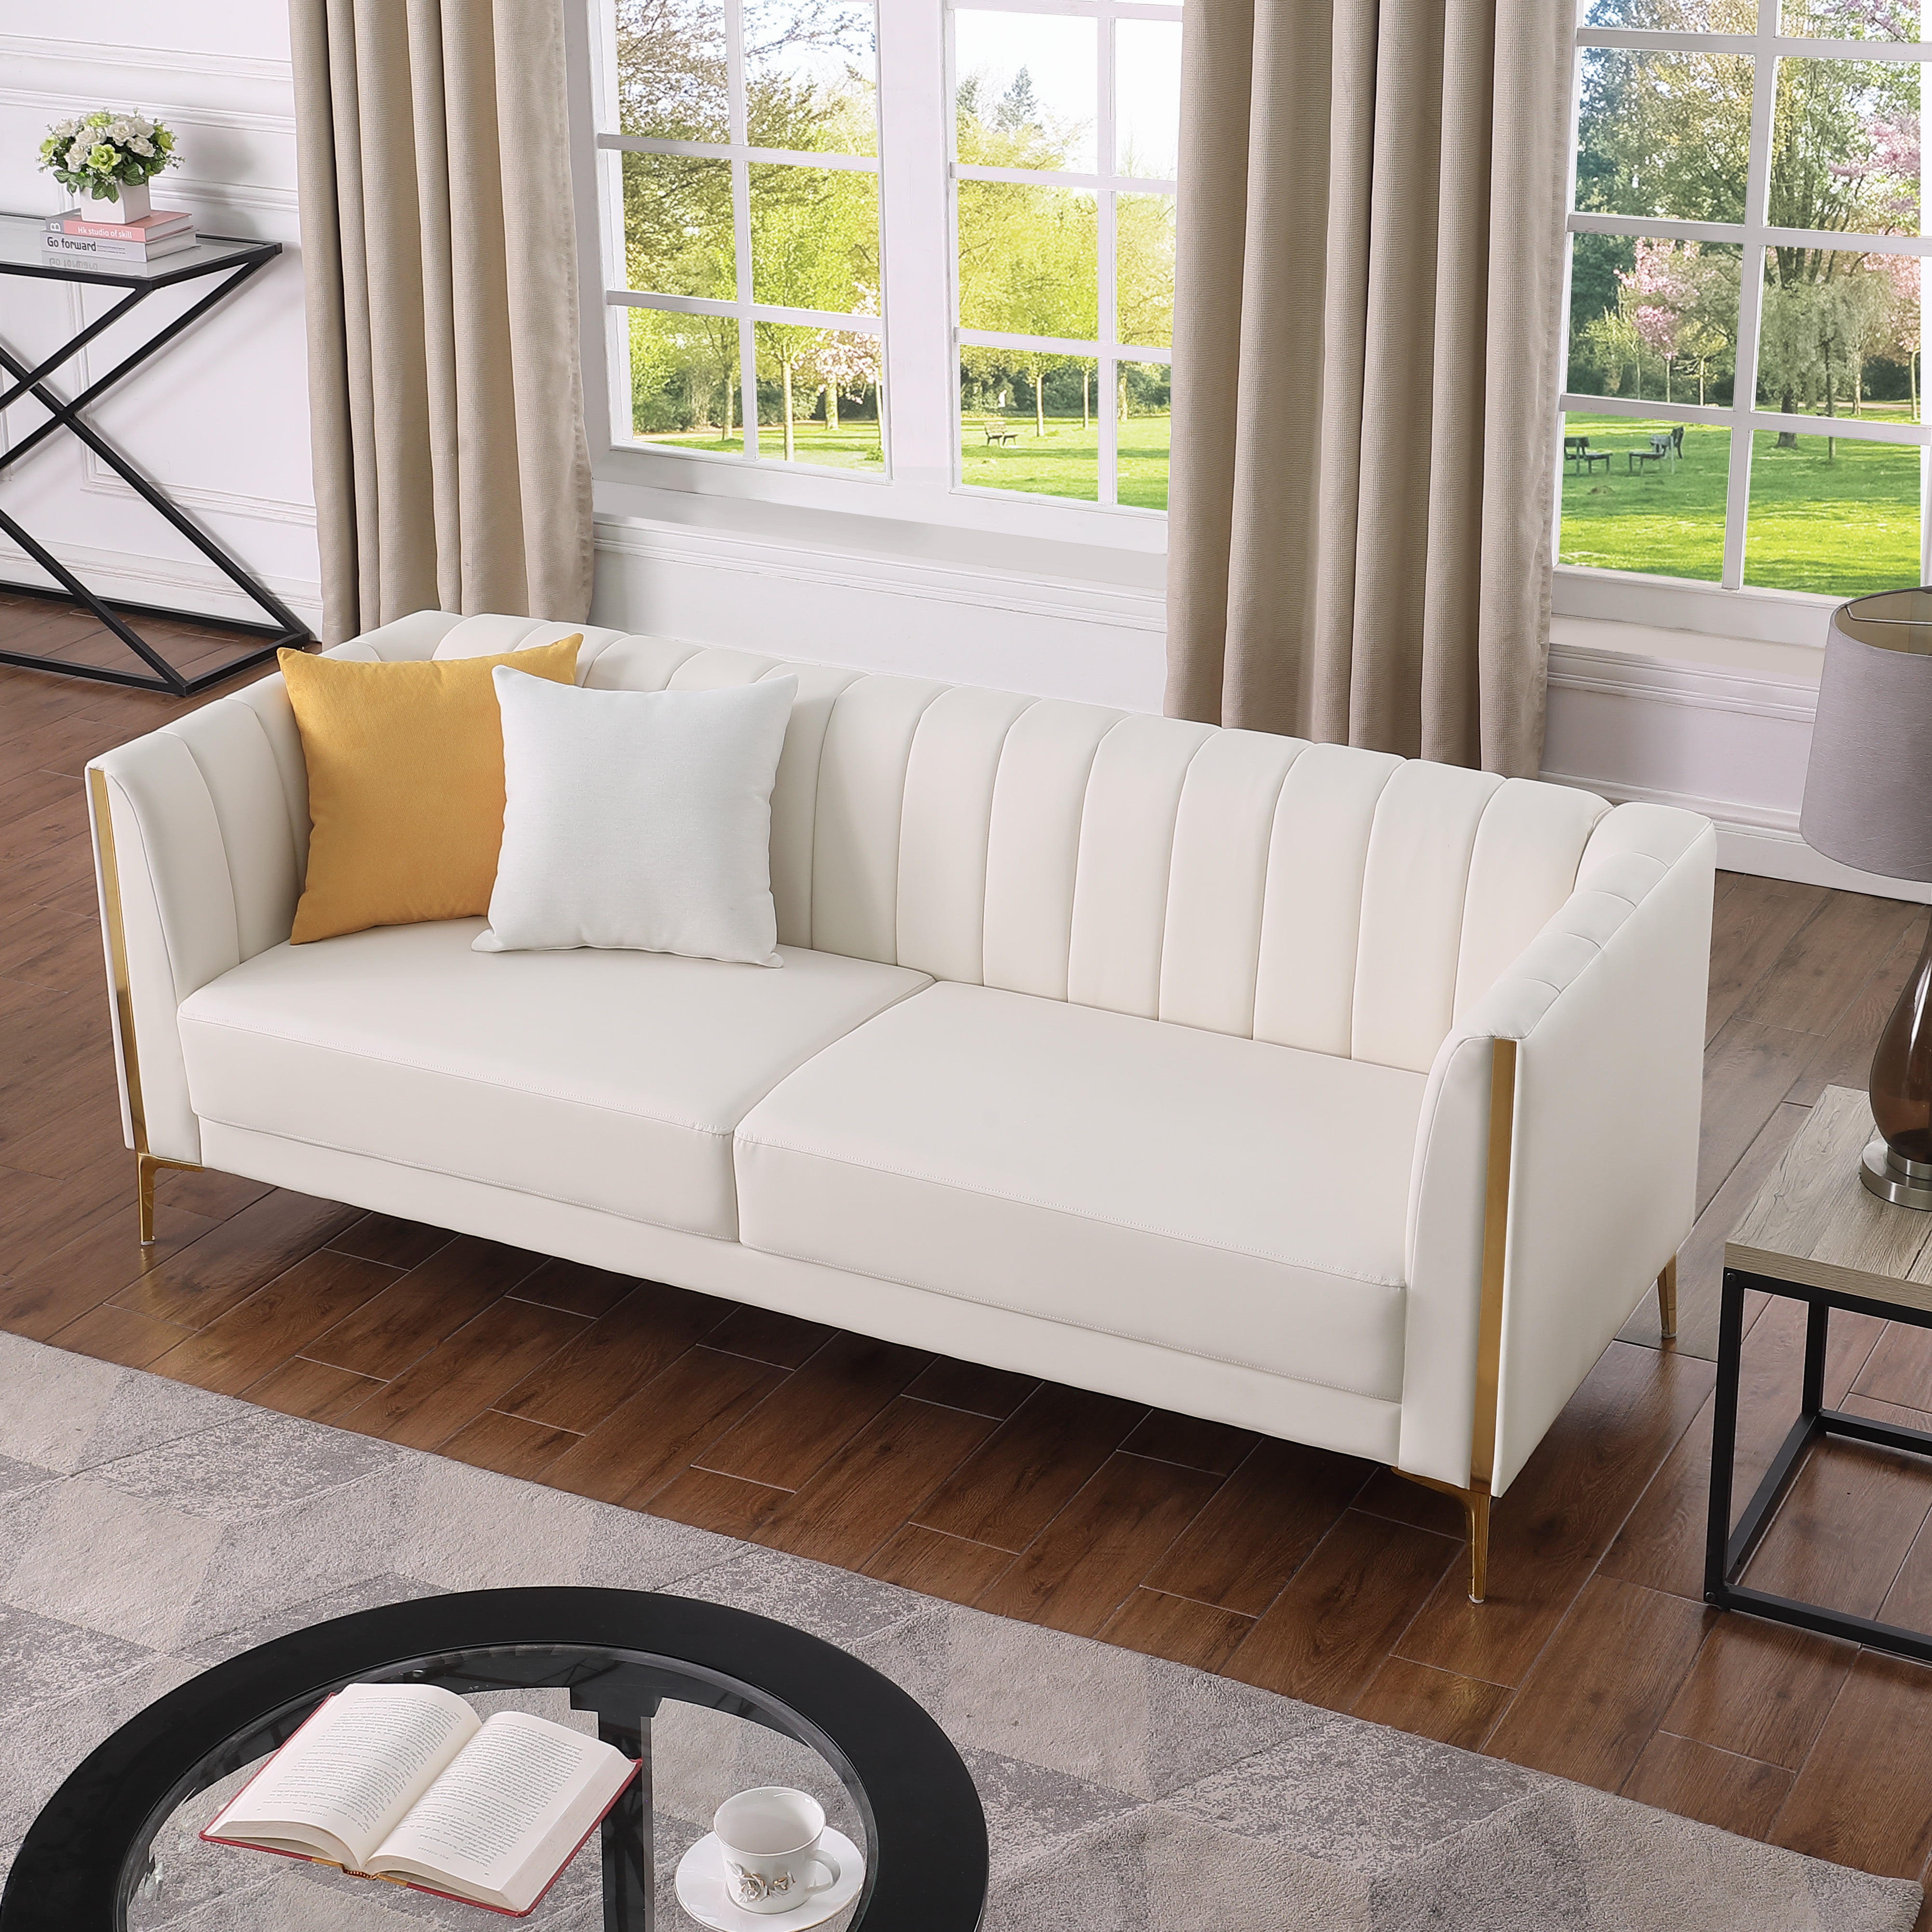 3 Seater Sofa Modern Pu Leather Couch